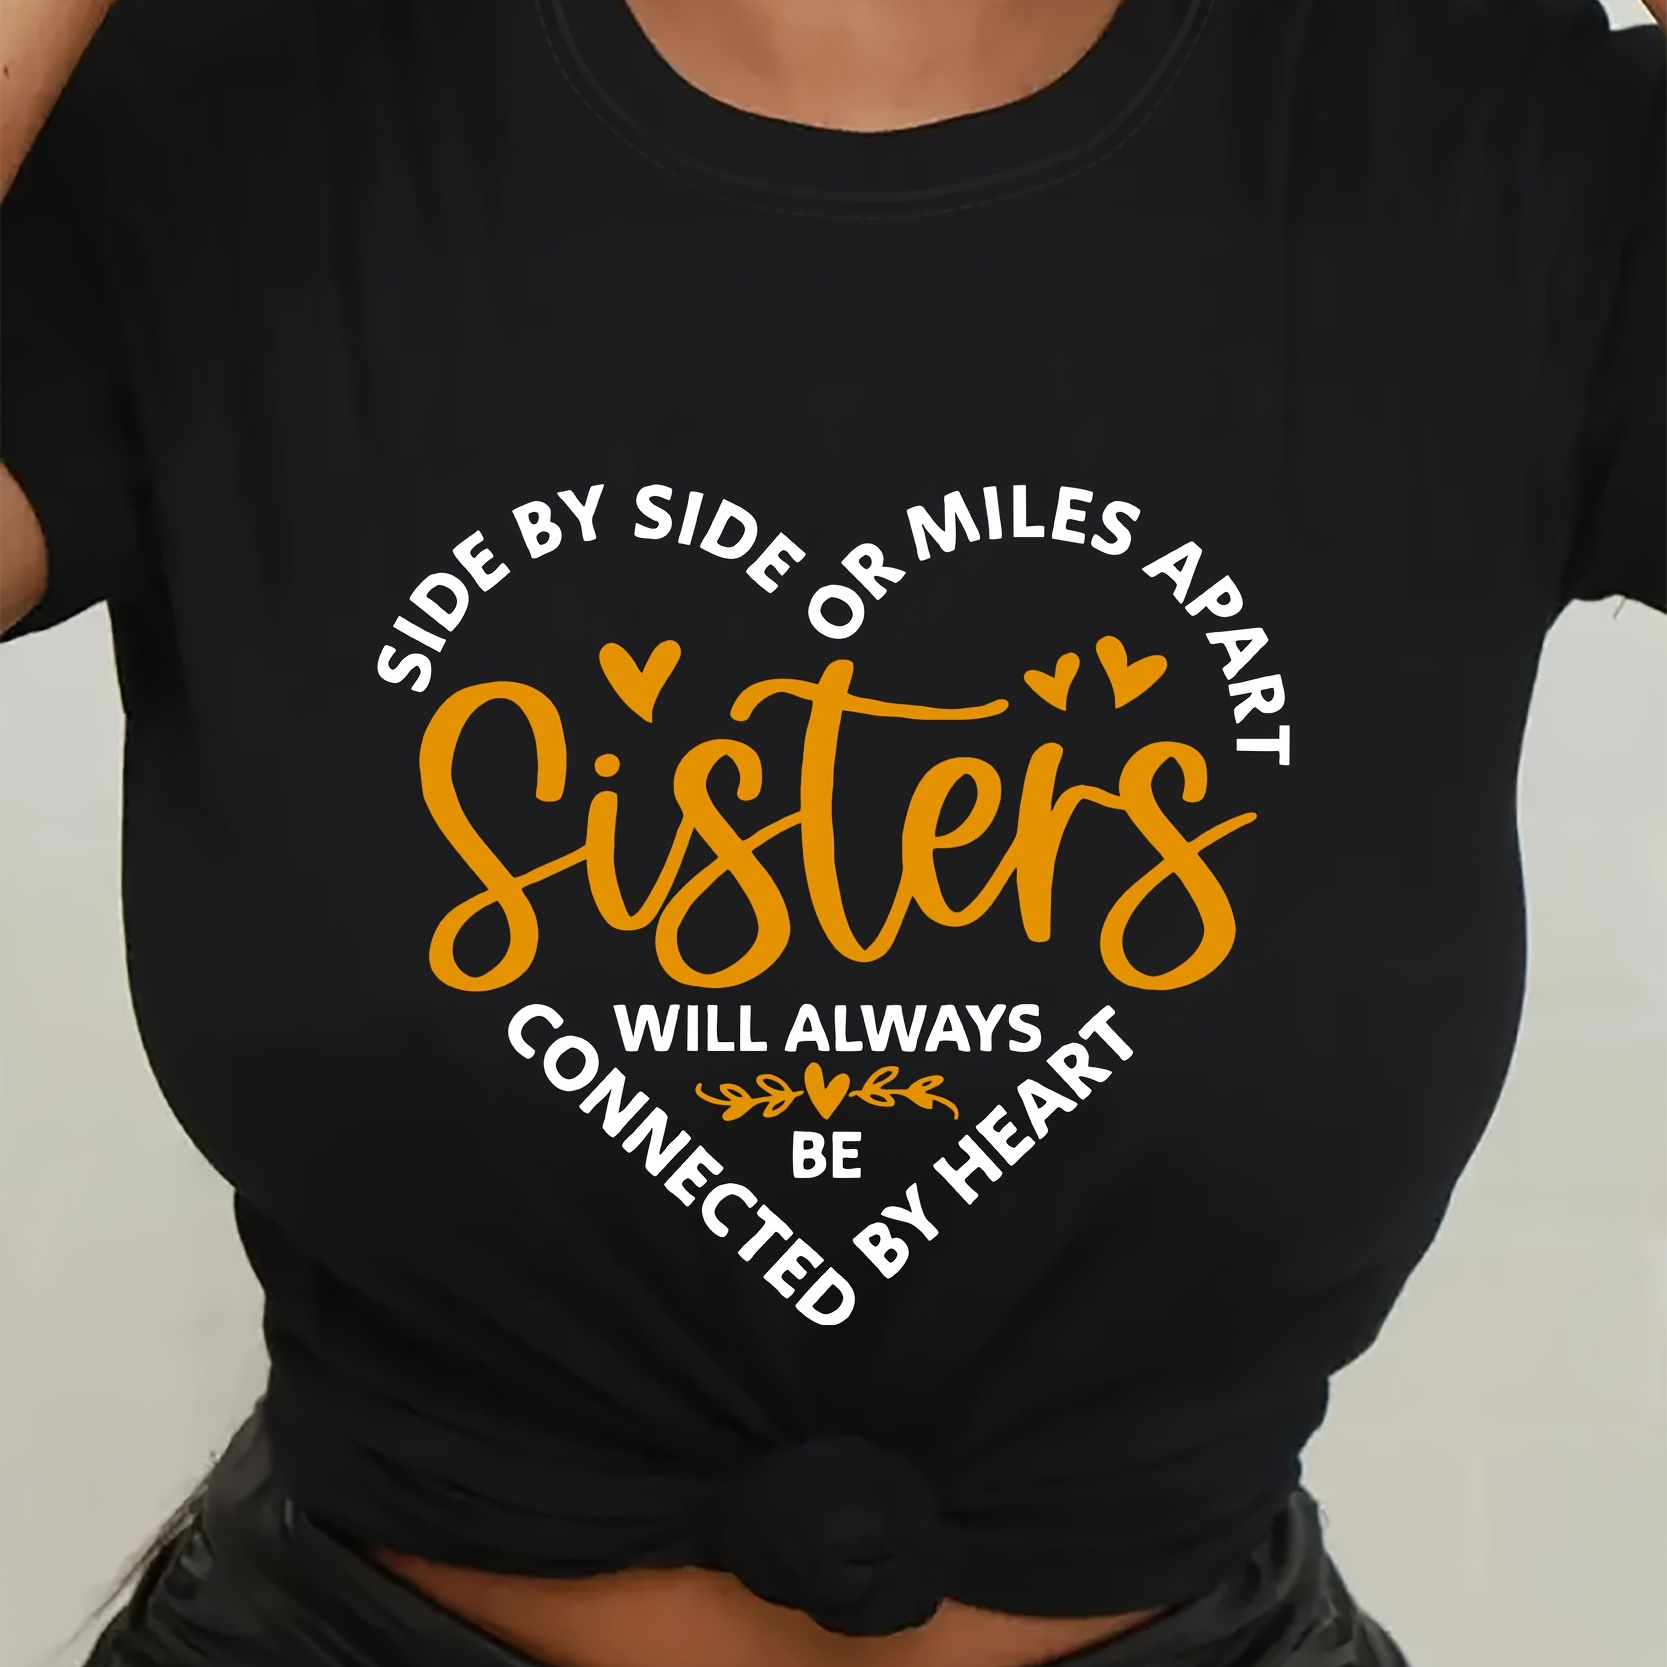 

Sisters Print T-shirt, Vintage Short Sleeve Crew Neck Top For Spring & Summer, Women's Clothing